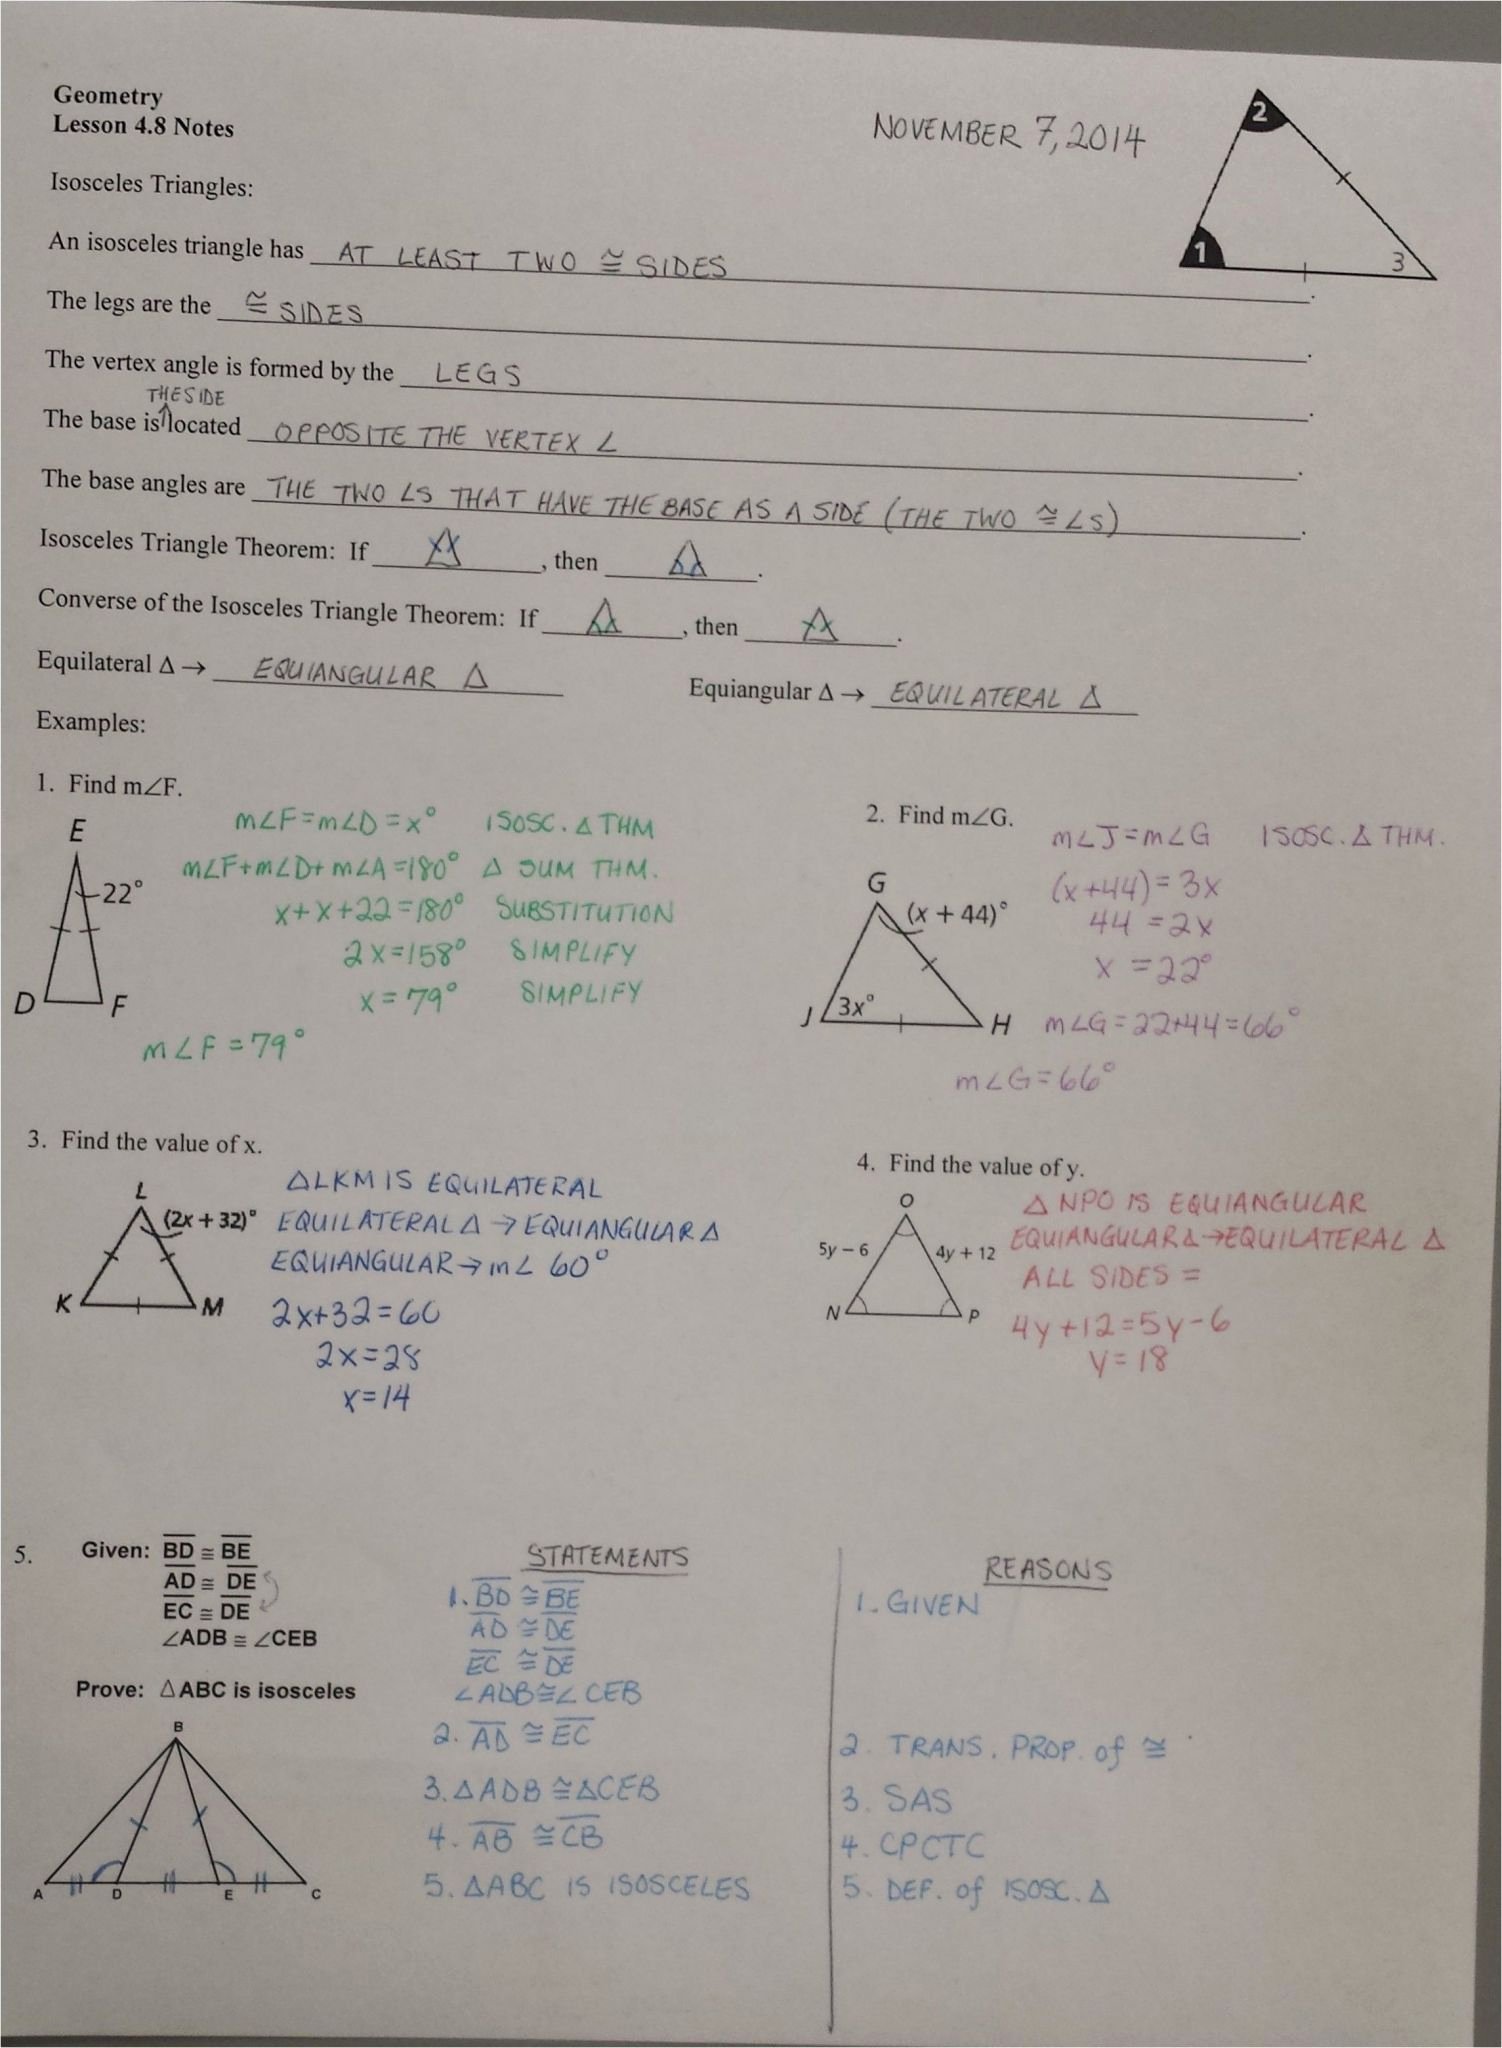 Geometry Worksheet Congruent Triangles Answers New Geometry Worksheet Congruent Triangles Sss and Sas Answers